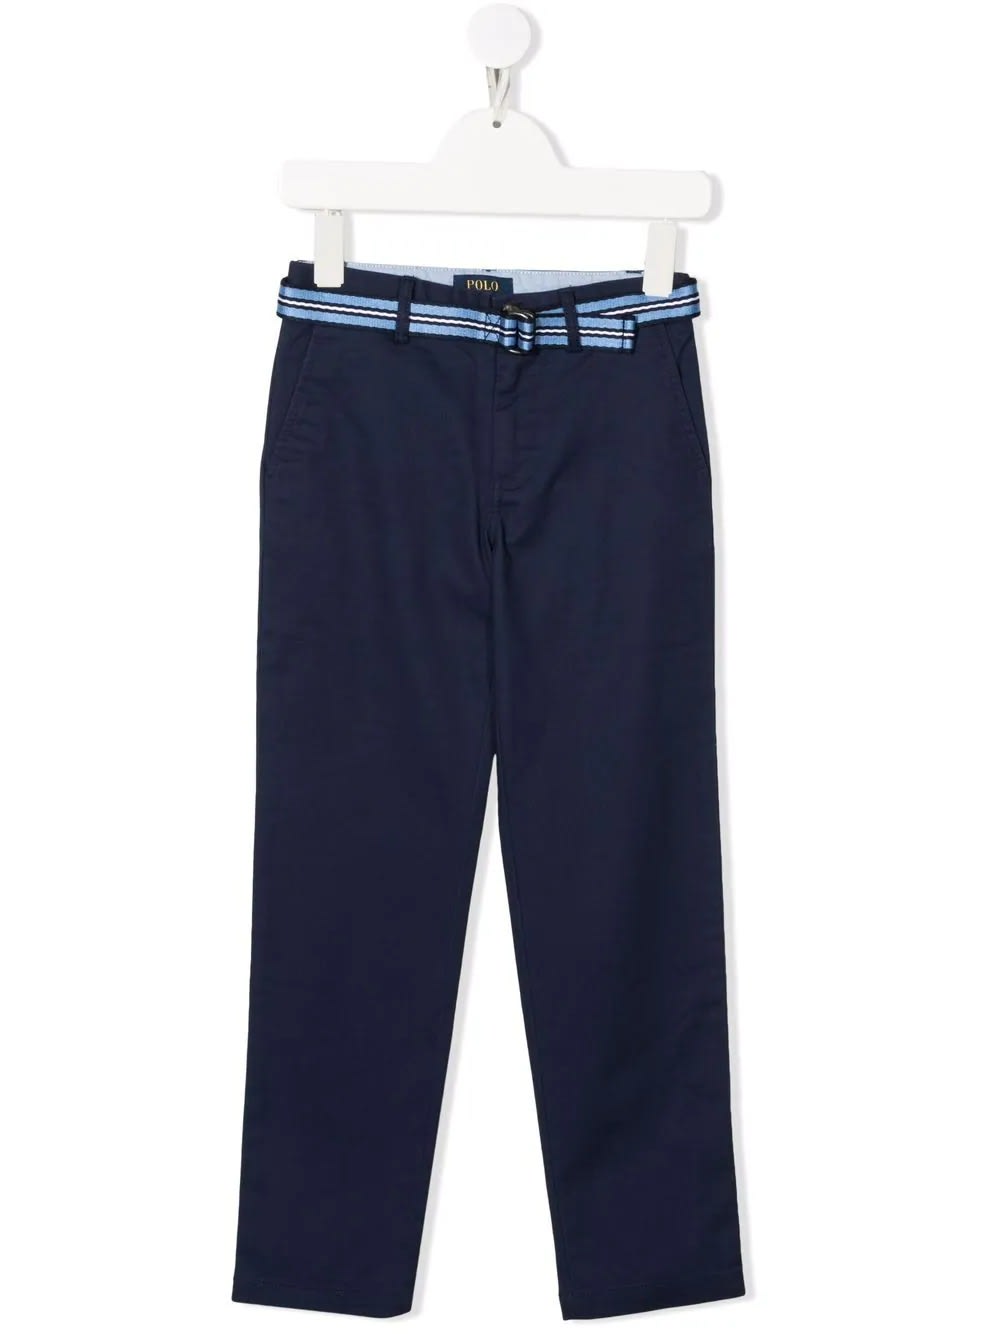 Ralph Lauren Kids Trousers In Navy Blue Stretch Chino With Belt